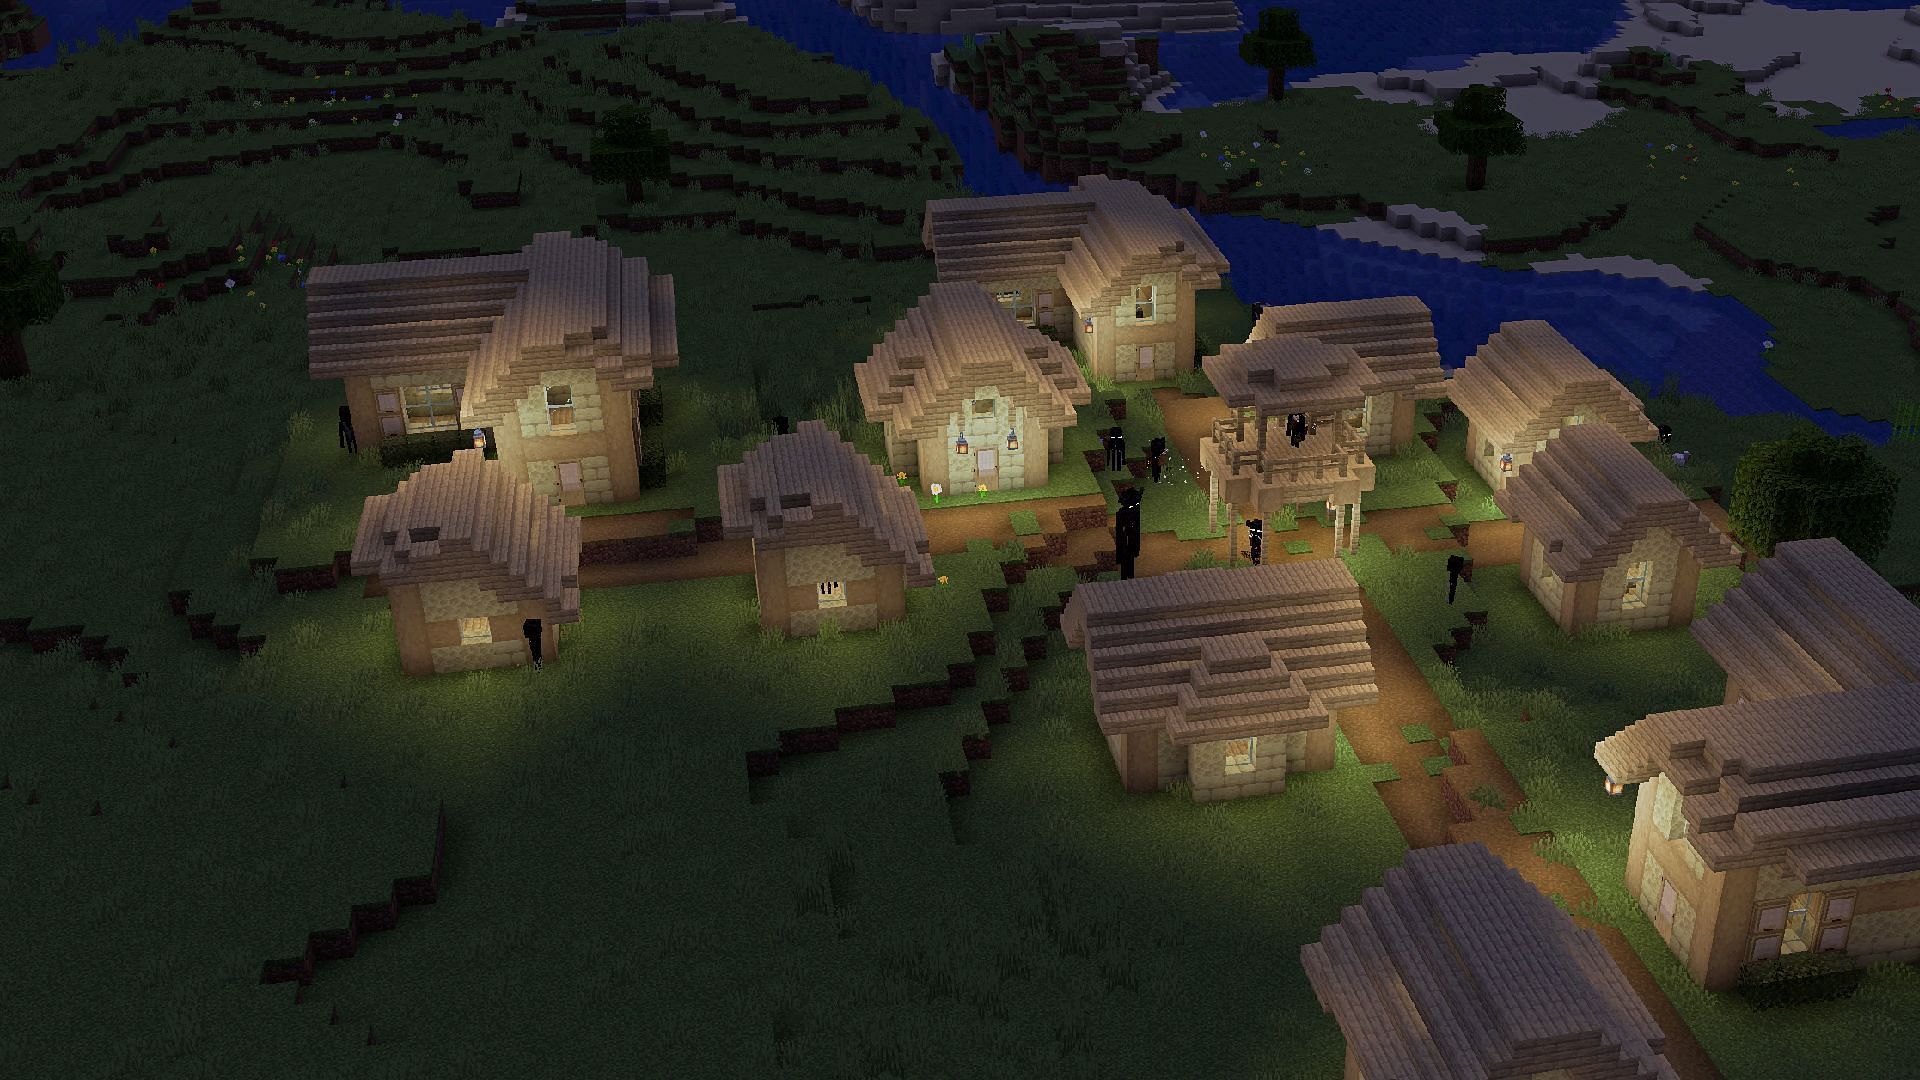 Farlanders mod adds new structures, mobs, items, and blocks (Image via CurseForge)